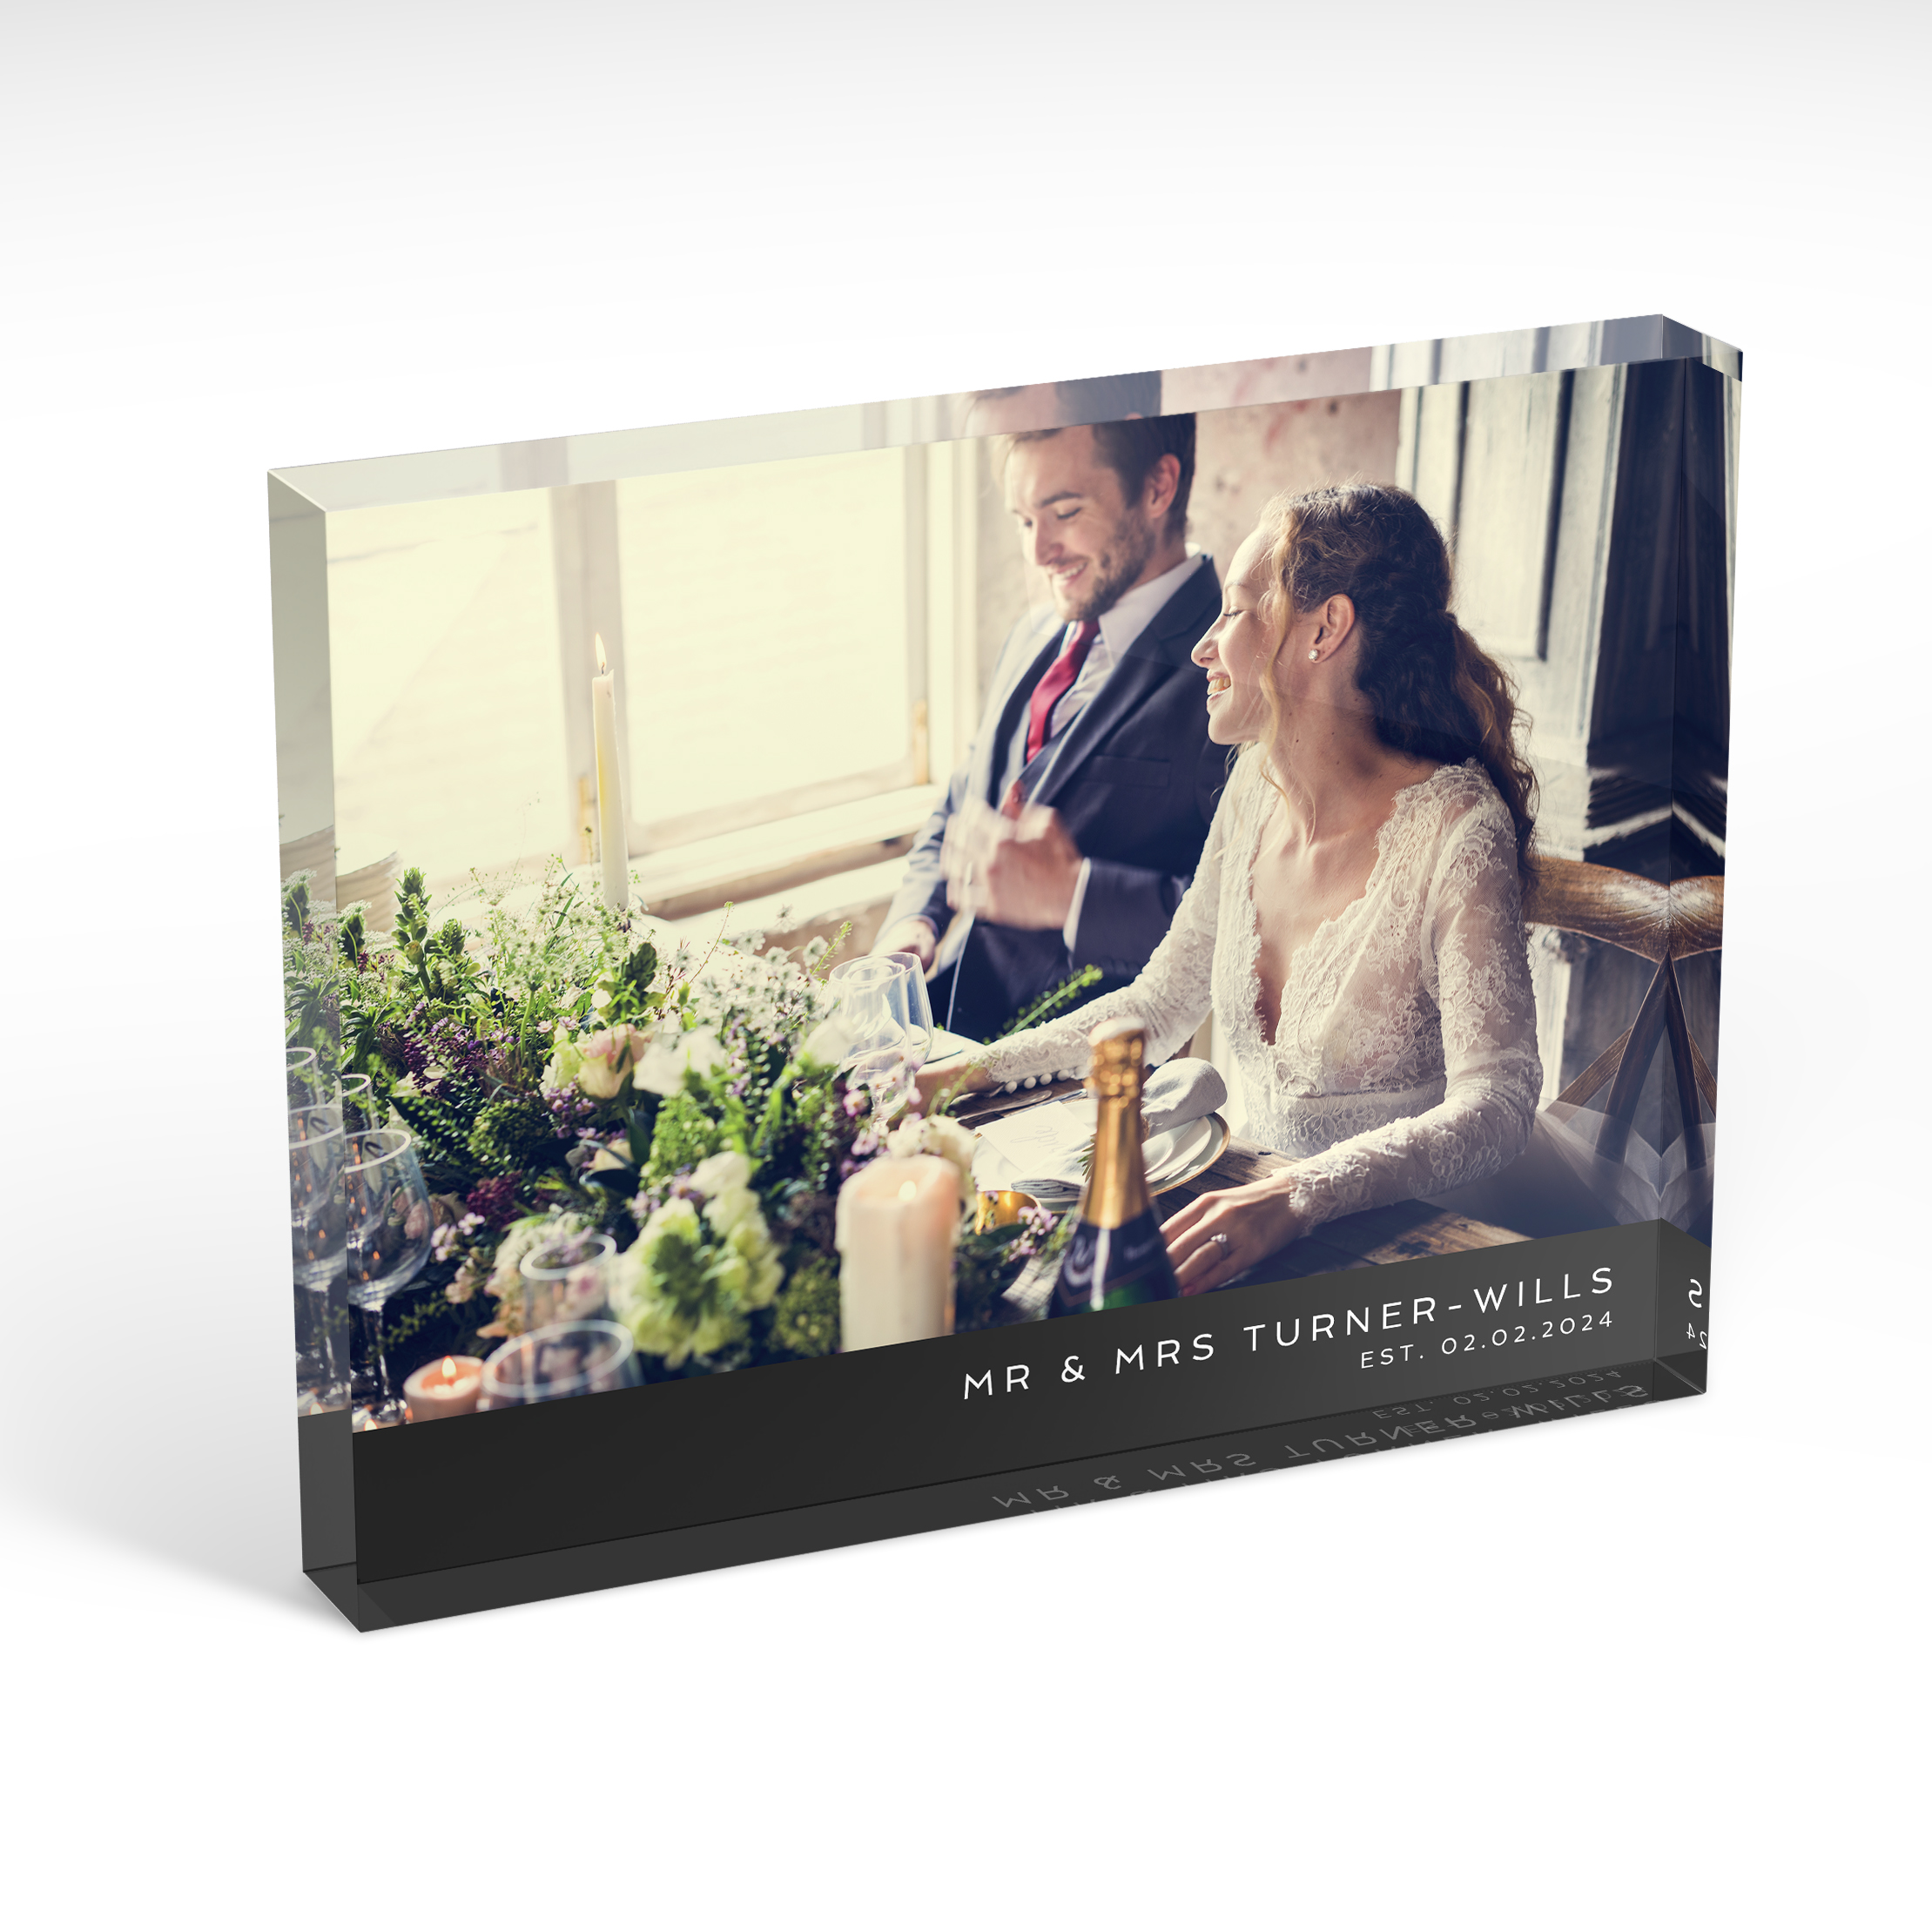 An angled side view of a landscape layout Acrylic Photo Block with space for 1 photo. Thiis design is named "Wedding Bliss". 